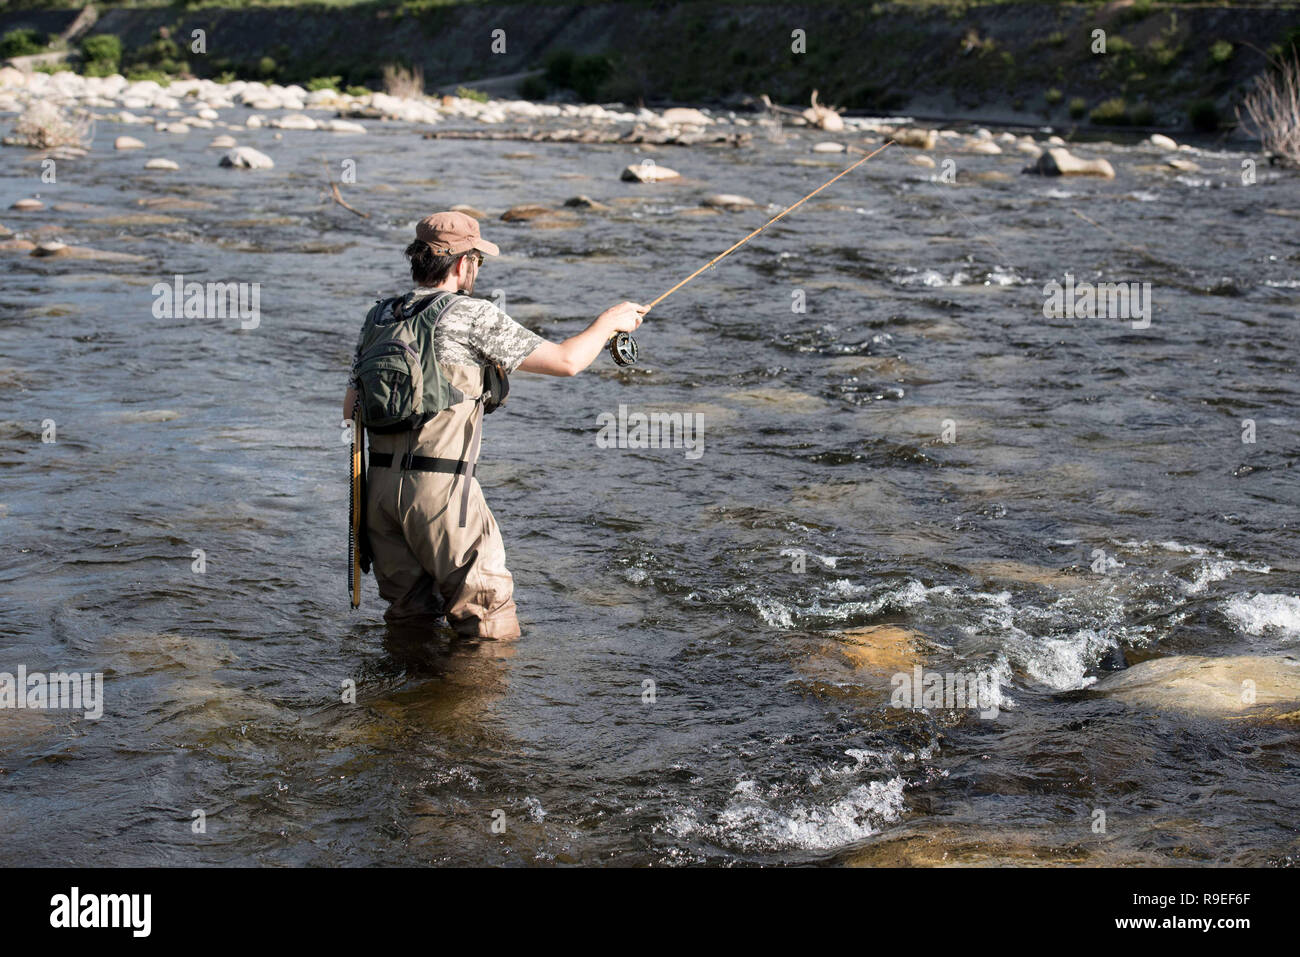 Aubenas (south-eastern France): Fly fisherman in the Ardeche river casting his fishing rod. Stock Photo